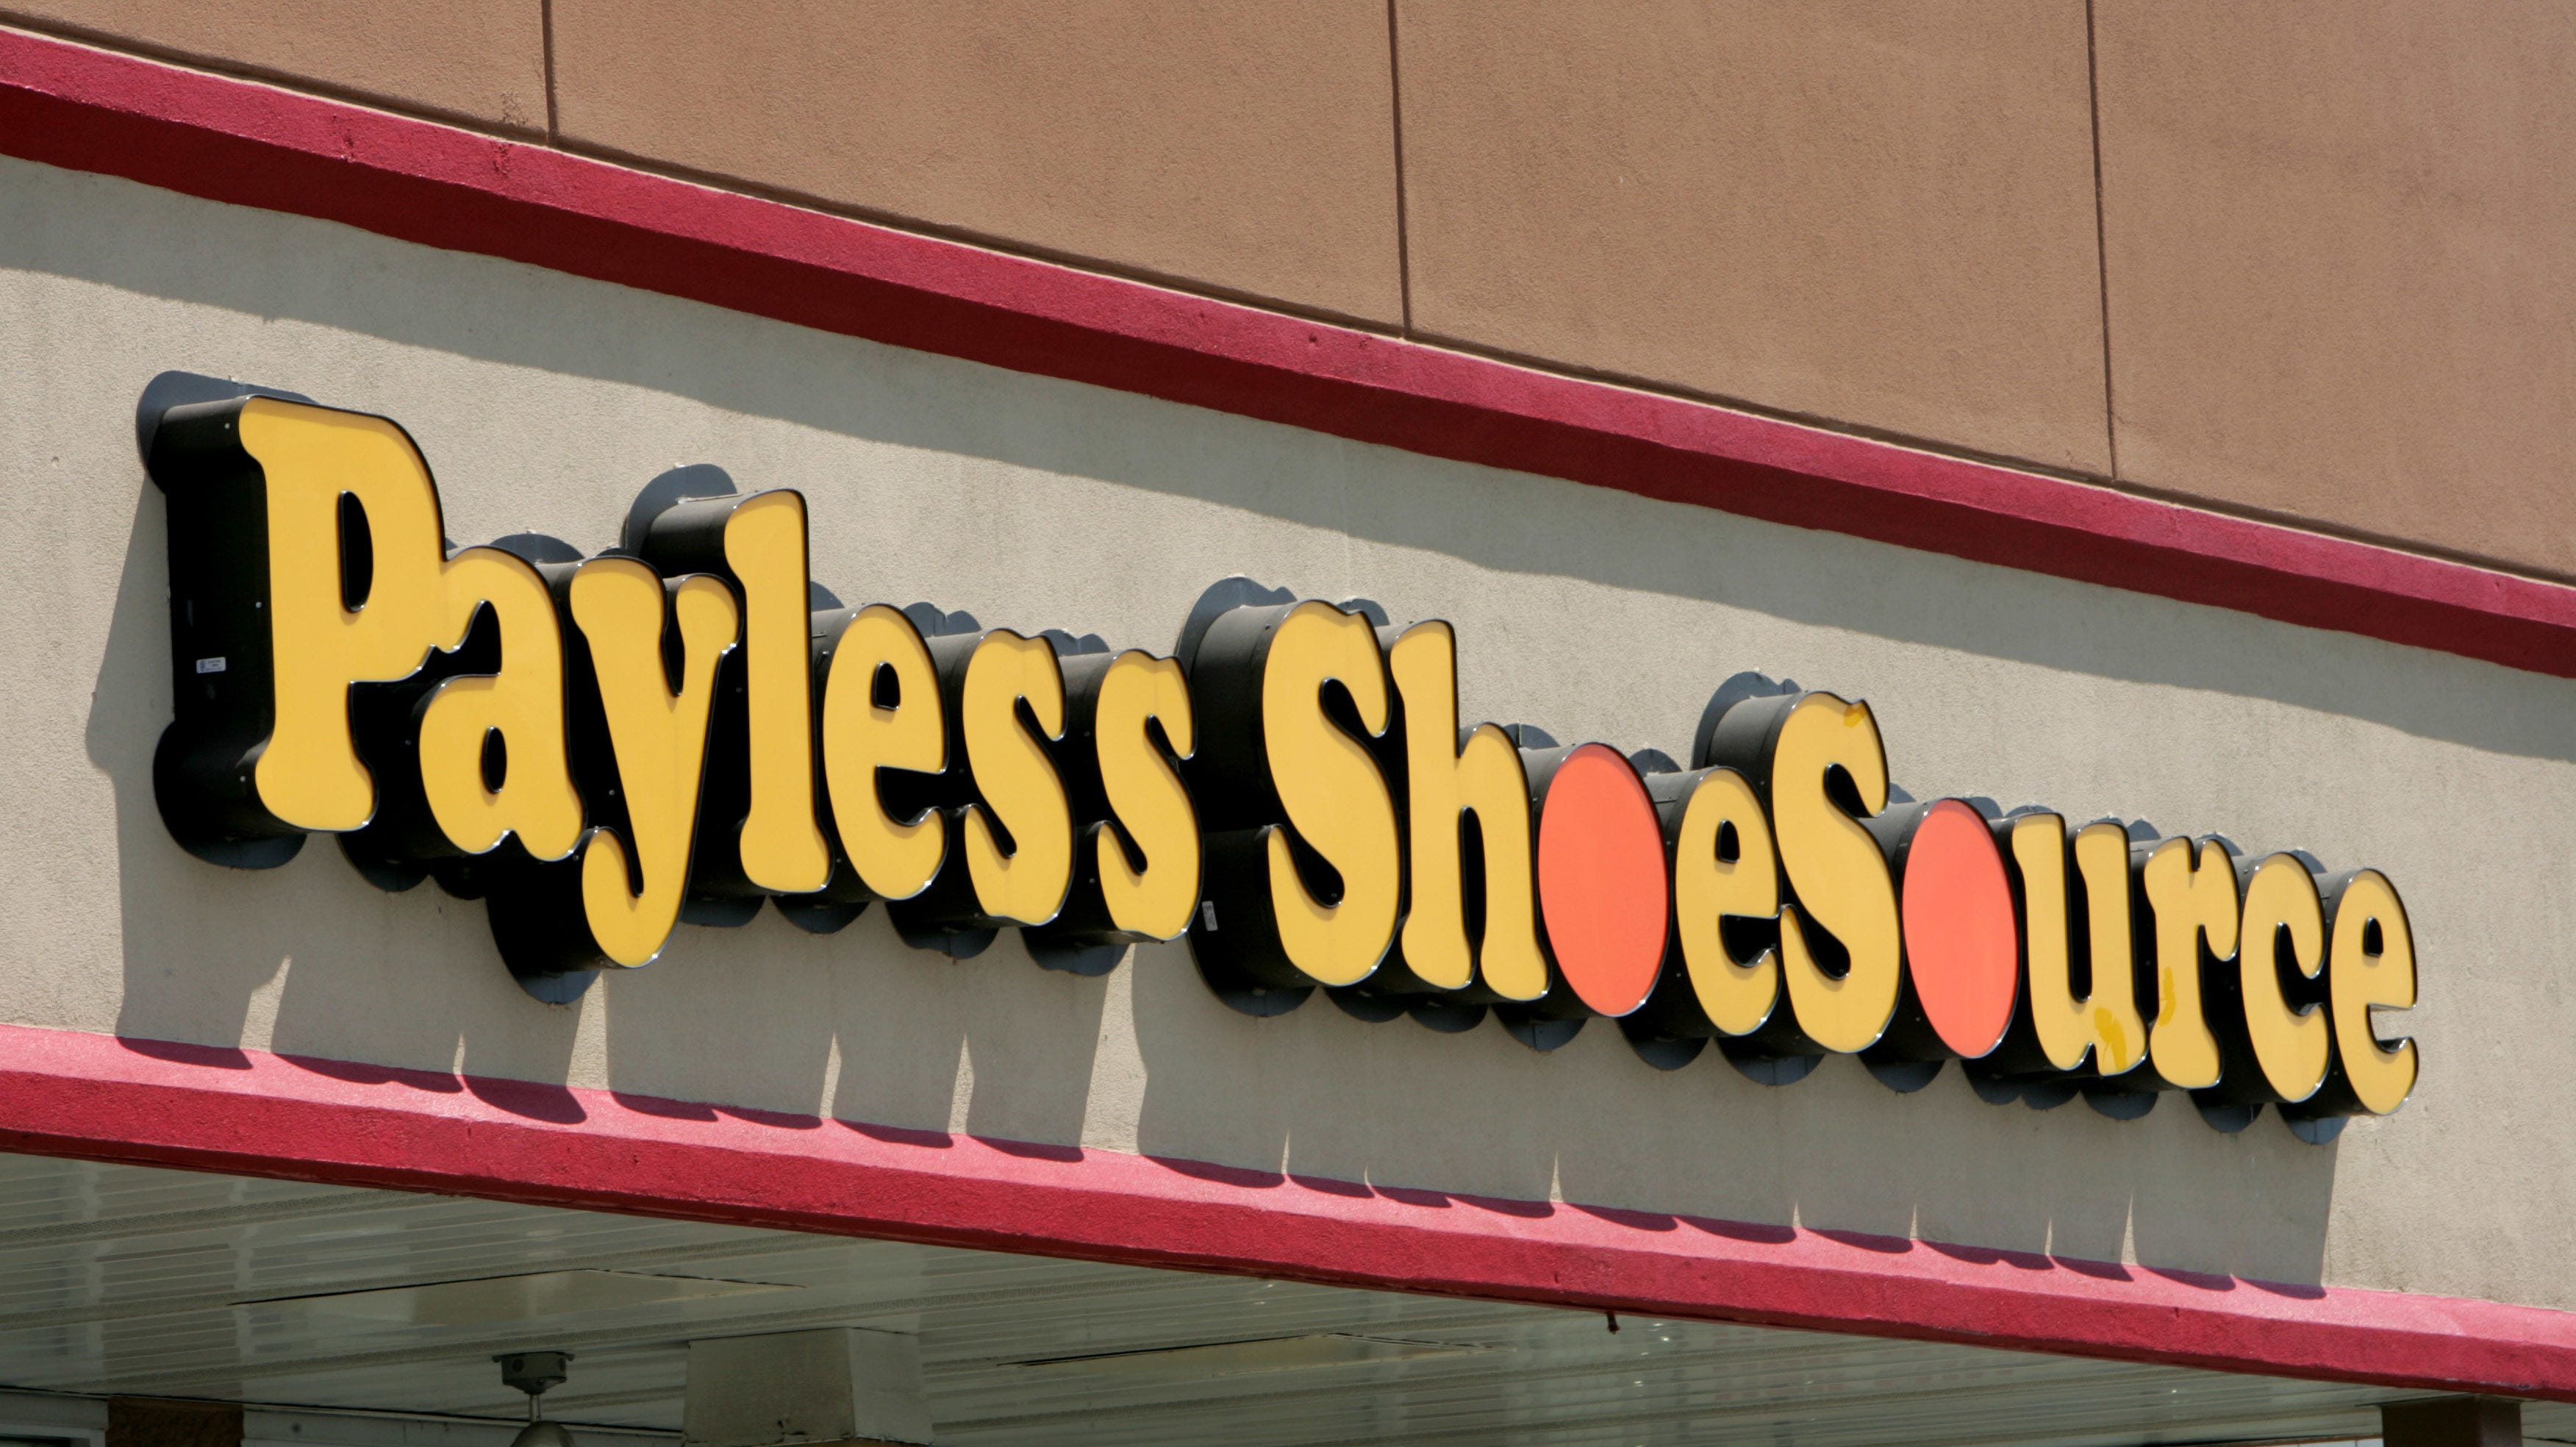 Payless shoes closing 10 Michigan stores